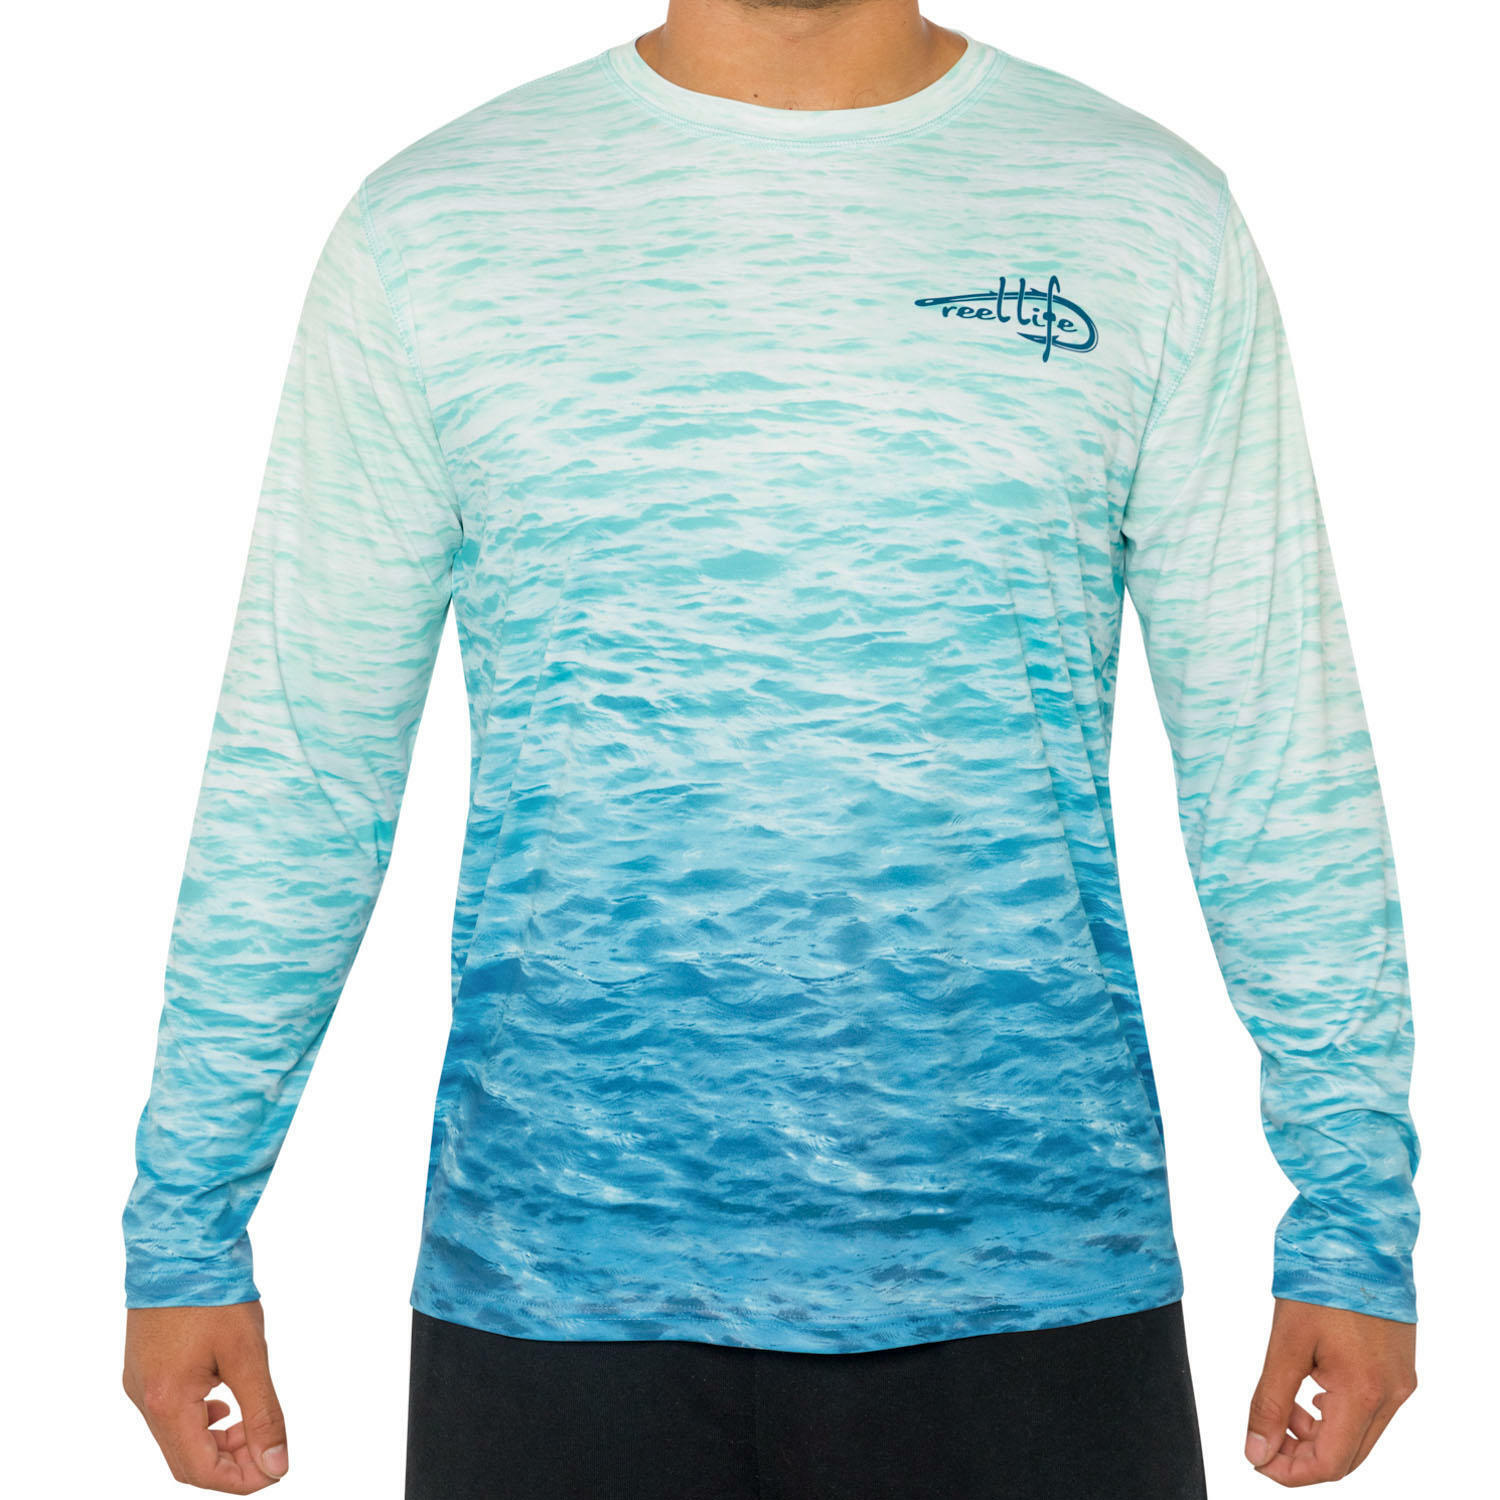 REEL LIFE MEN'S SUN DEFENDER LONG SLEEVE UV TEE SELECT COLOR & SIZE NEW